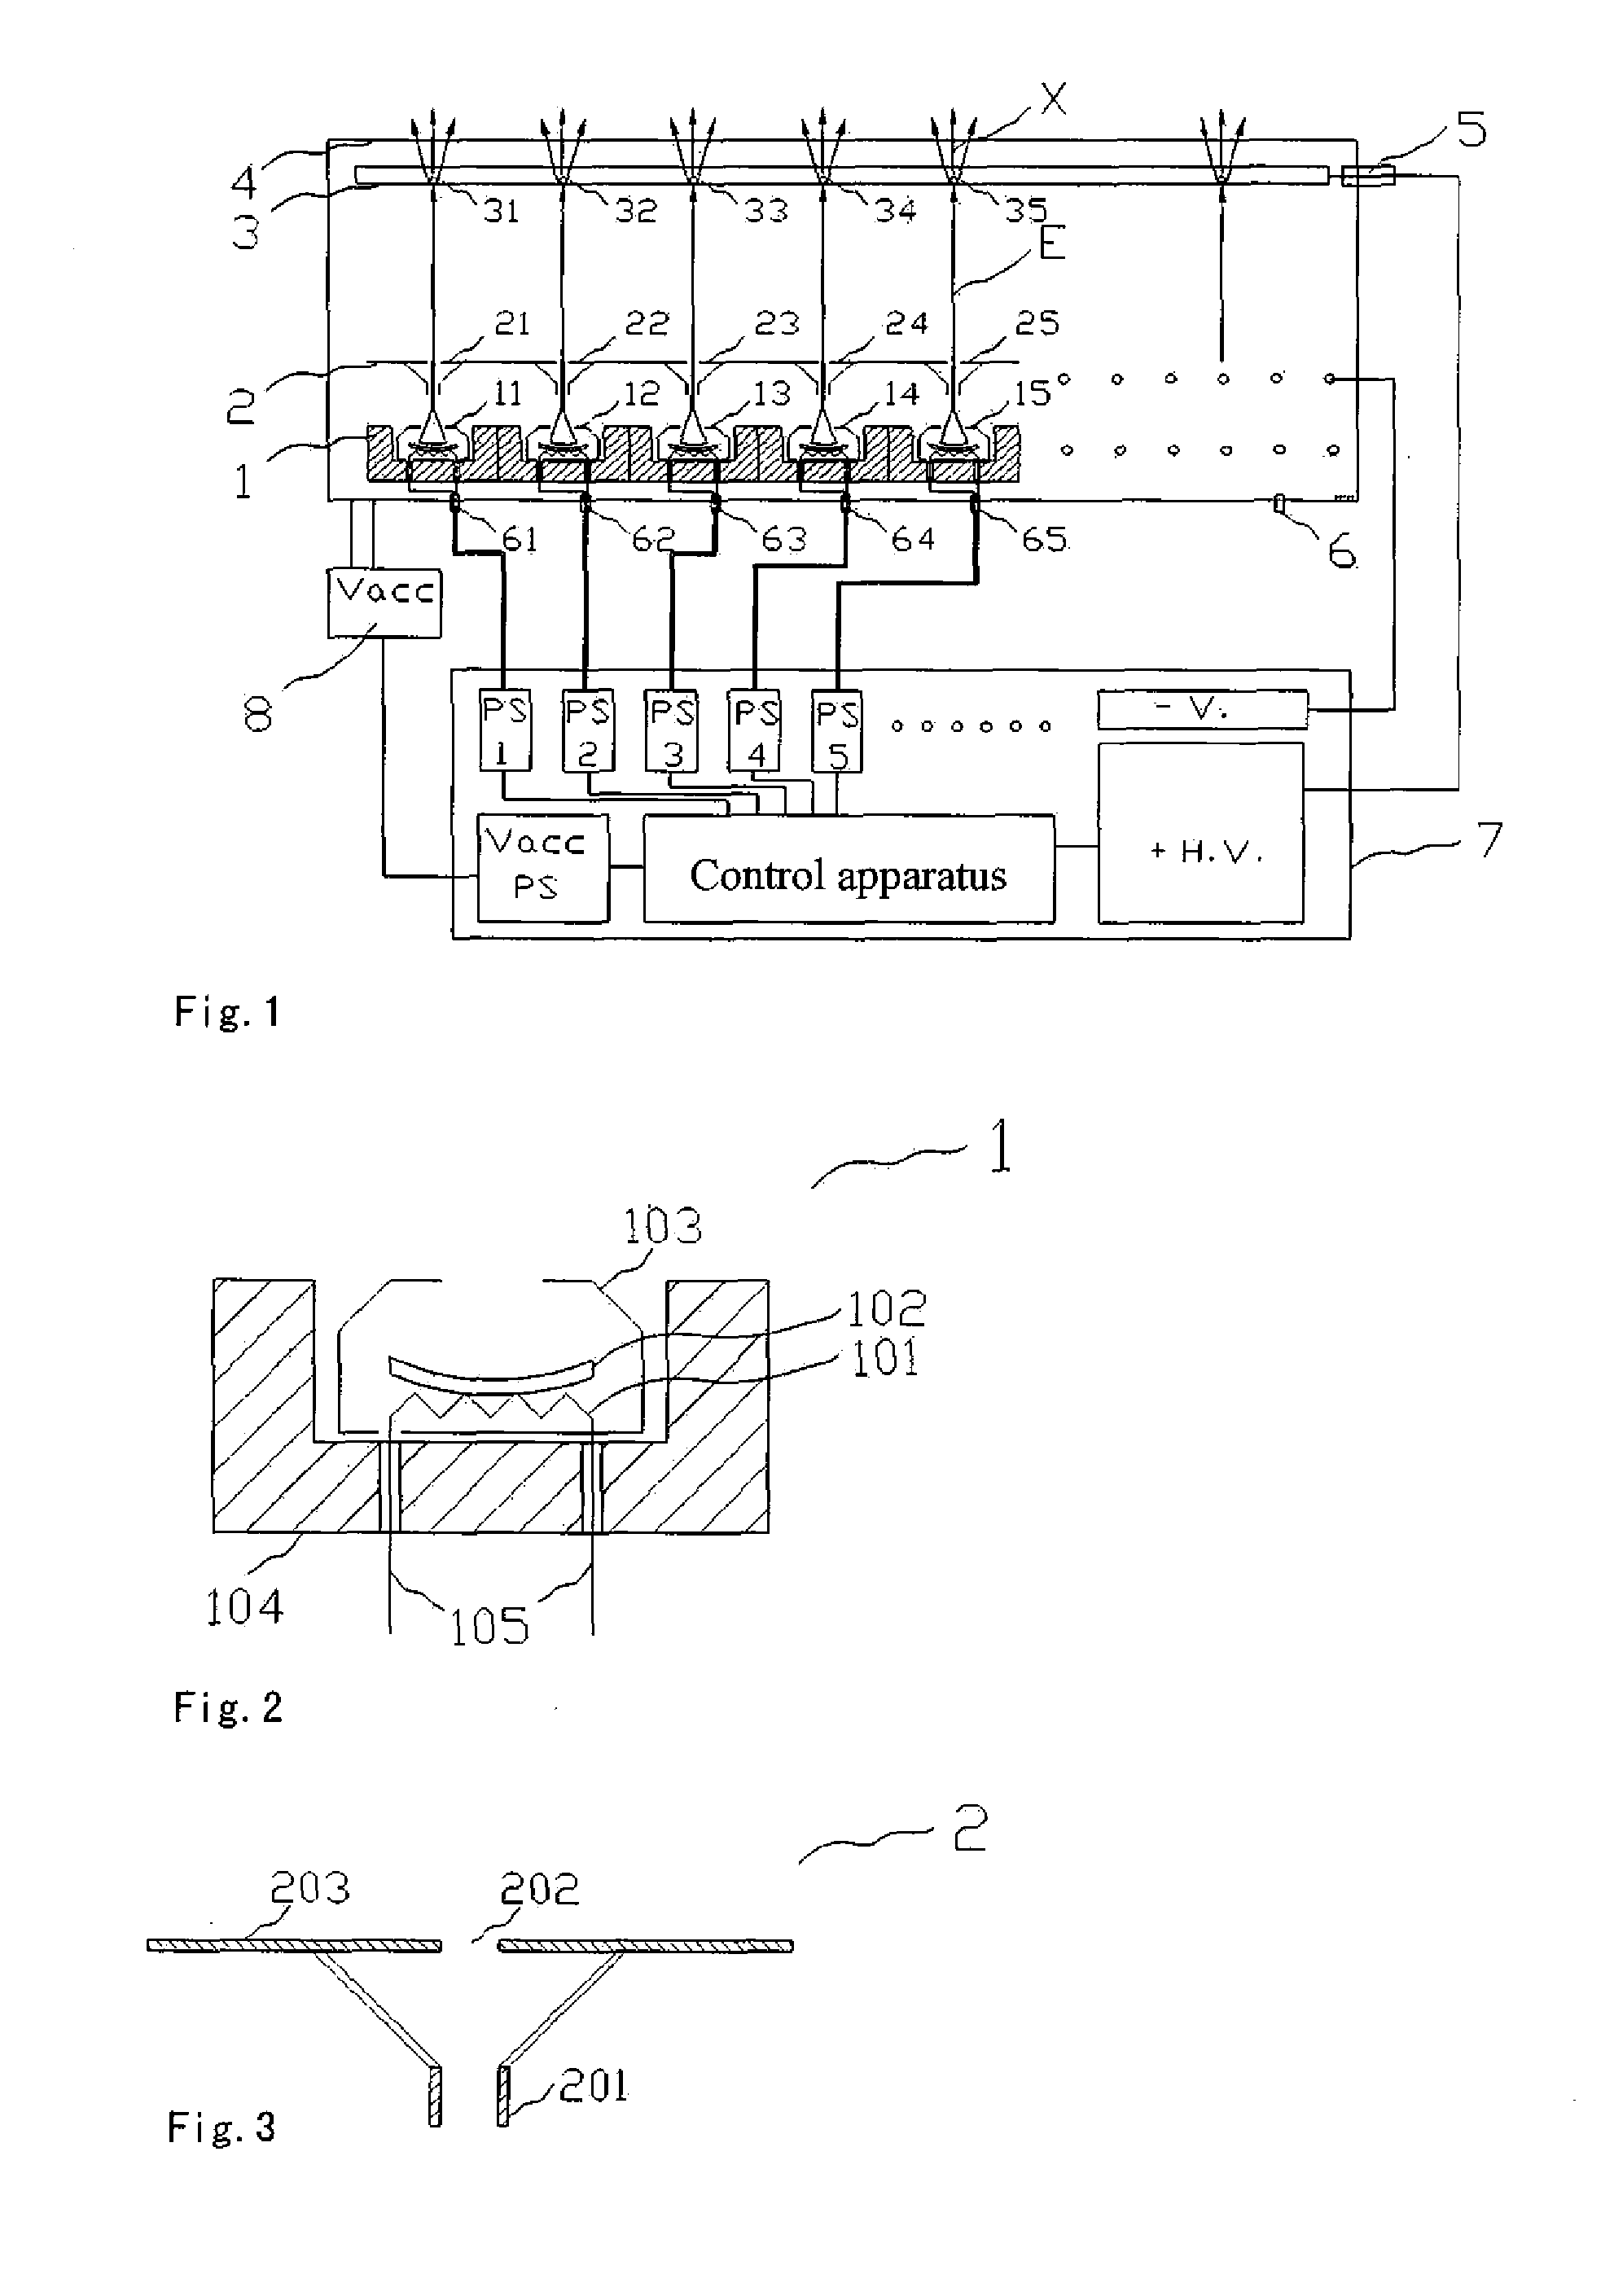 Cathode control multi-cathode distributed x-ray apparatus and ct device having said apparatus